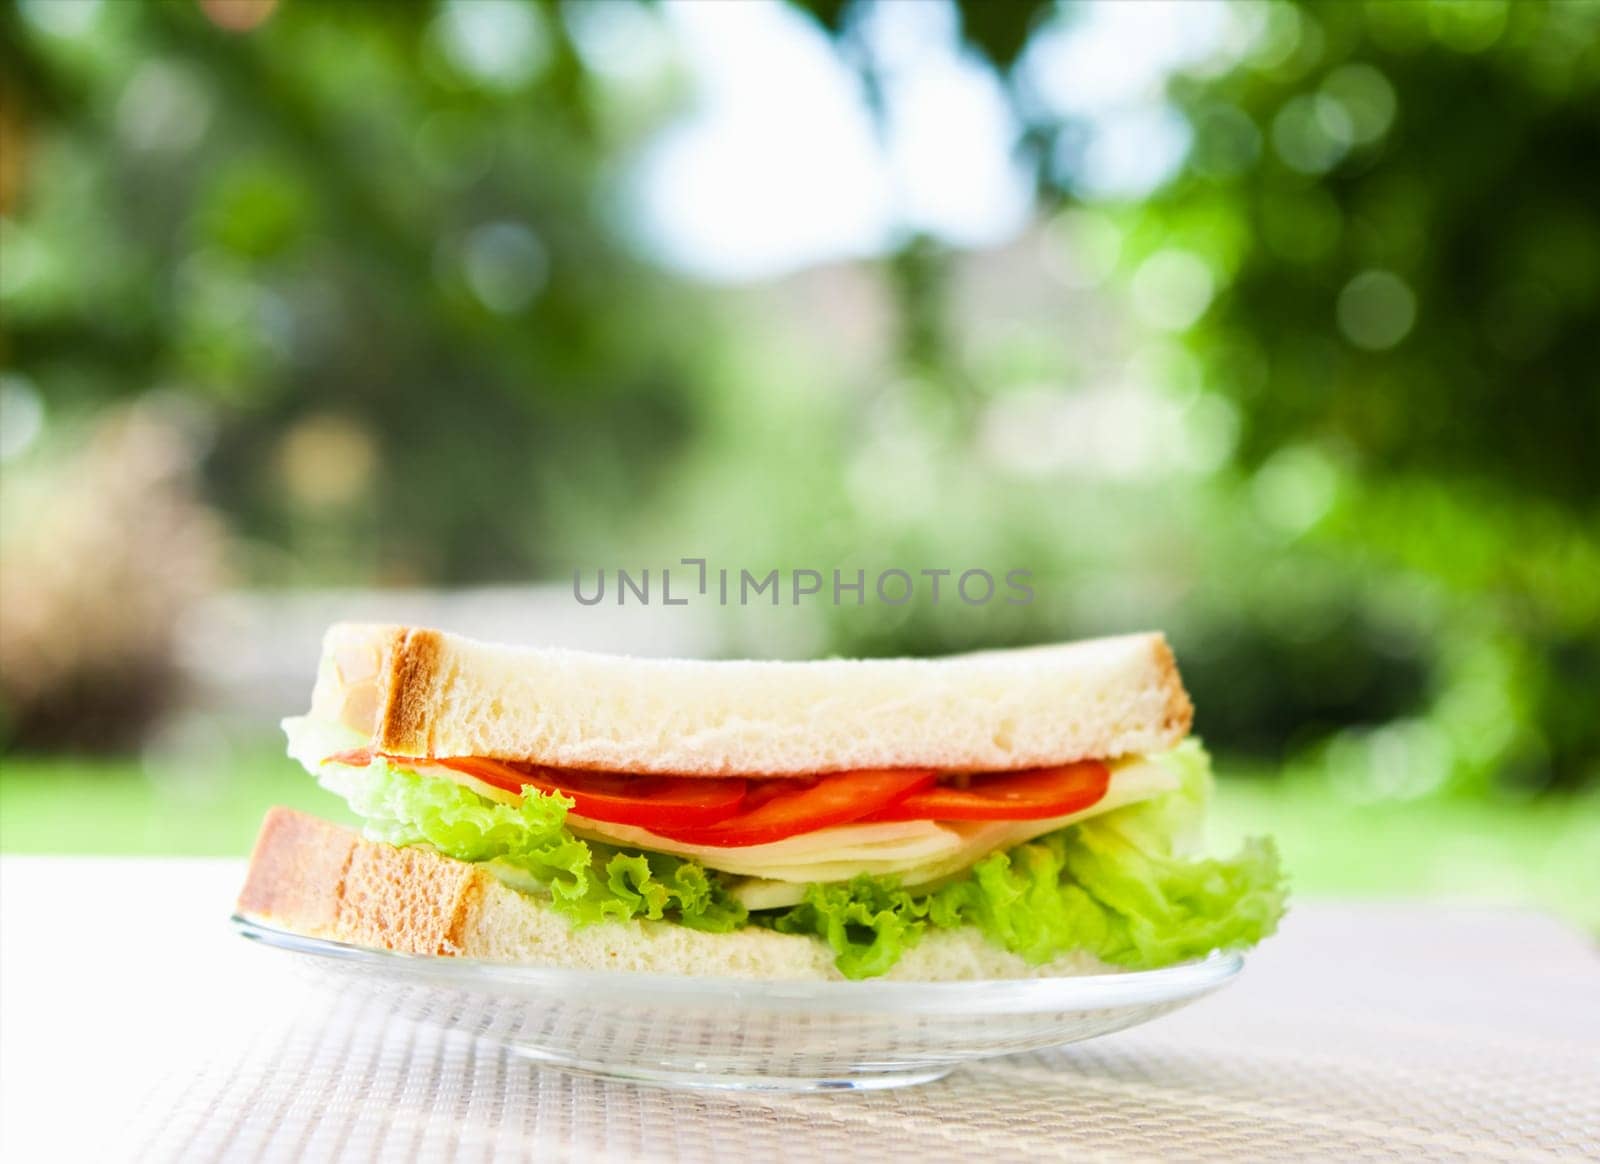 cheese and veggies sandwich - healthy snacks and homemade food styled concept, elegant visuals